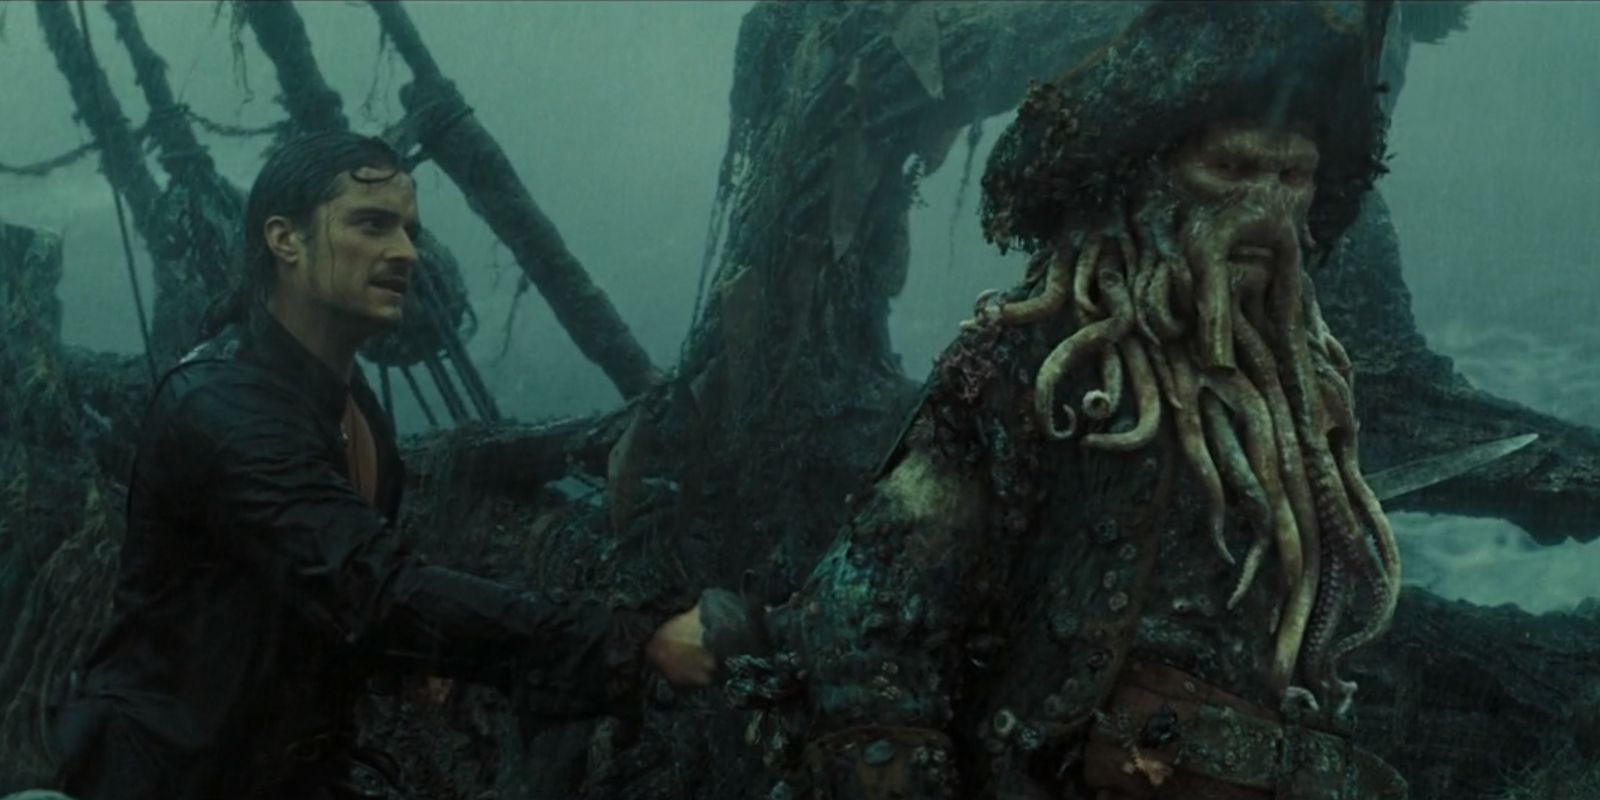 Will Turner stabbing Davy Jones in Pirates Of The Caribbean At World's End